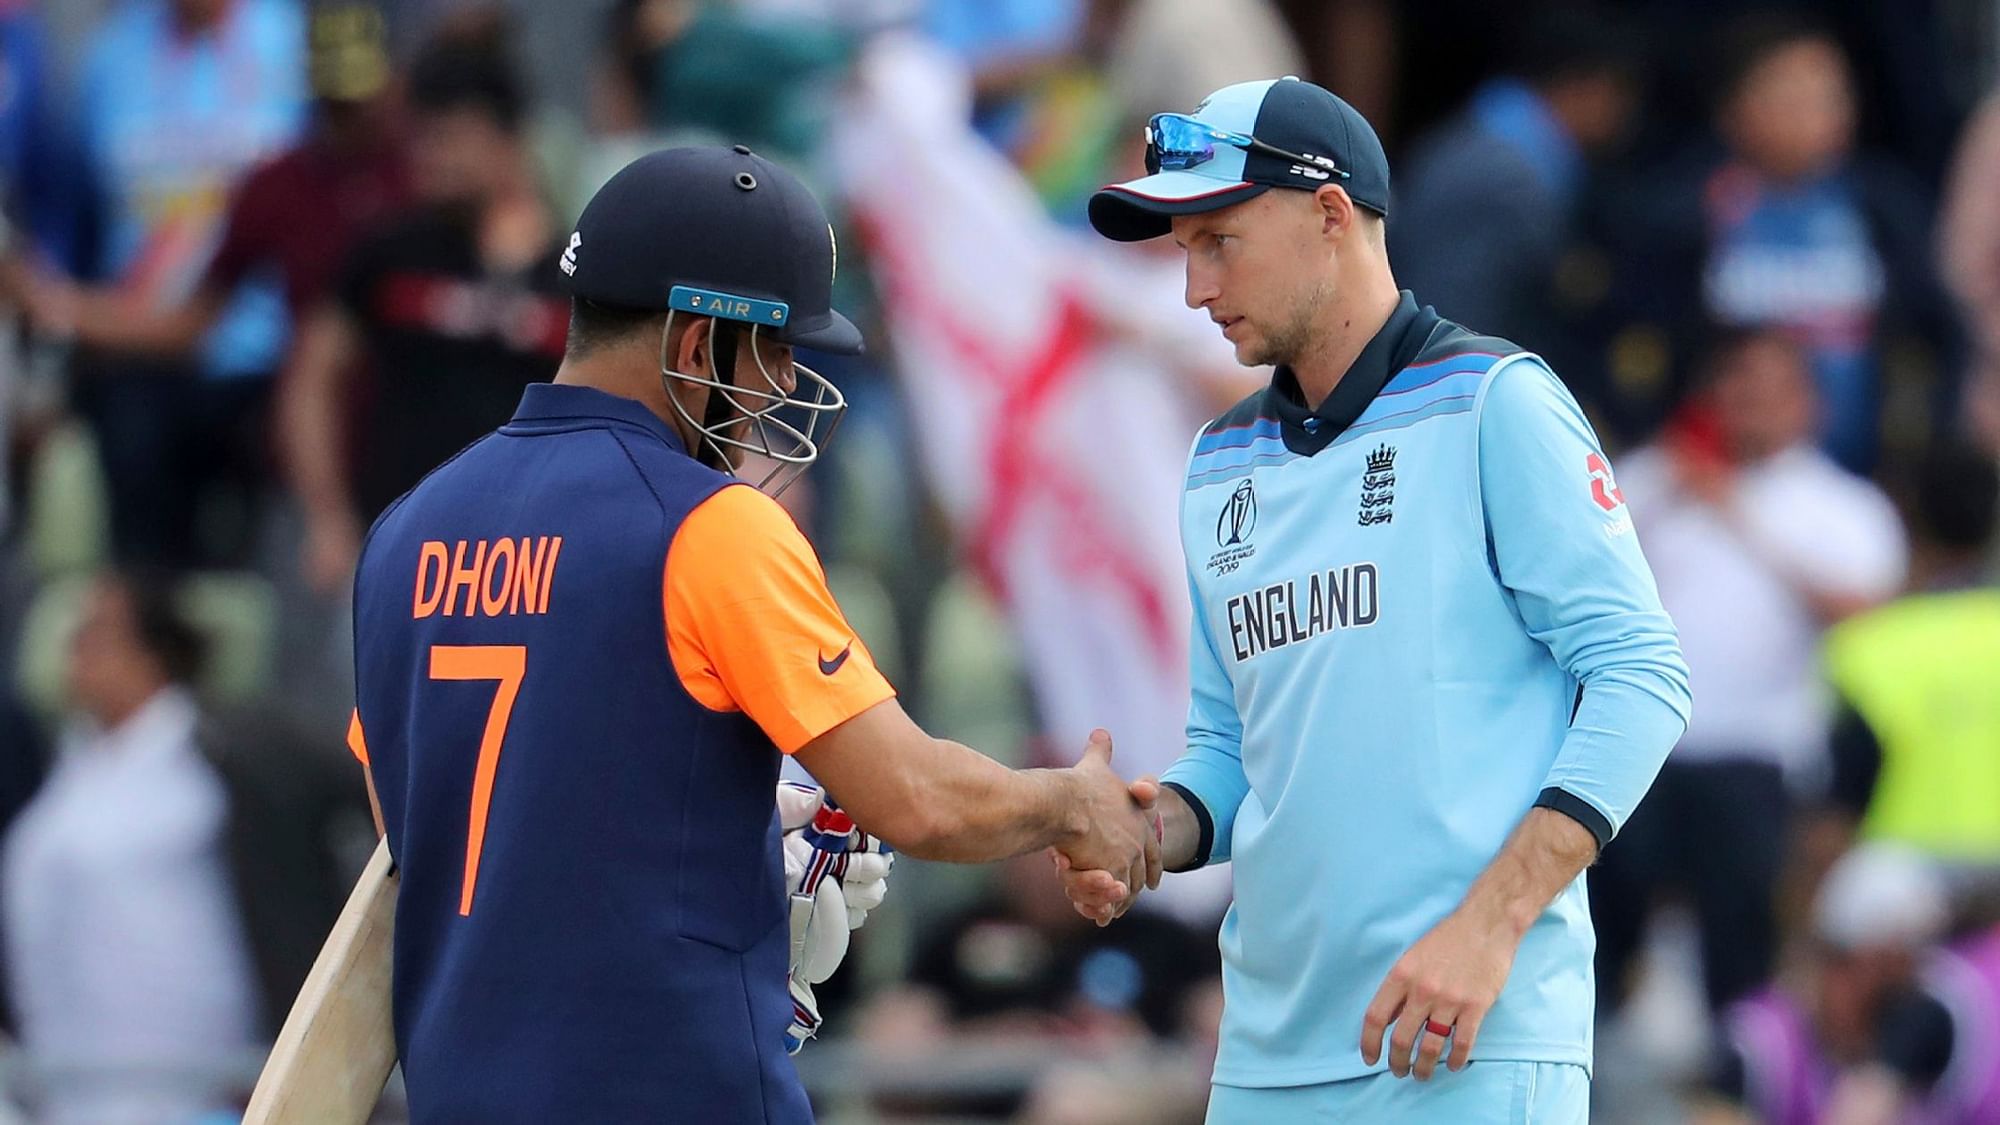 India, playing in an away kit to avoid a clash of colors with England, finished on 306-5 after losing the toss.